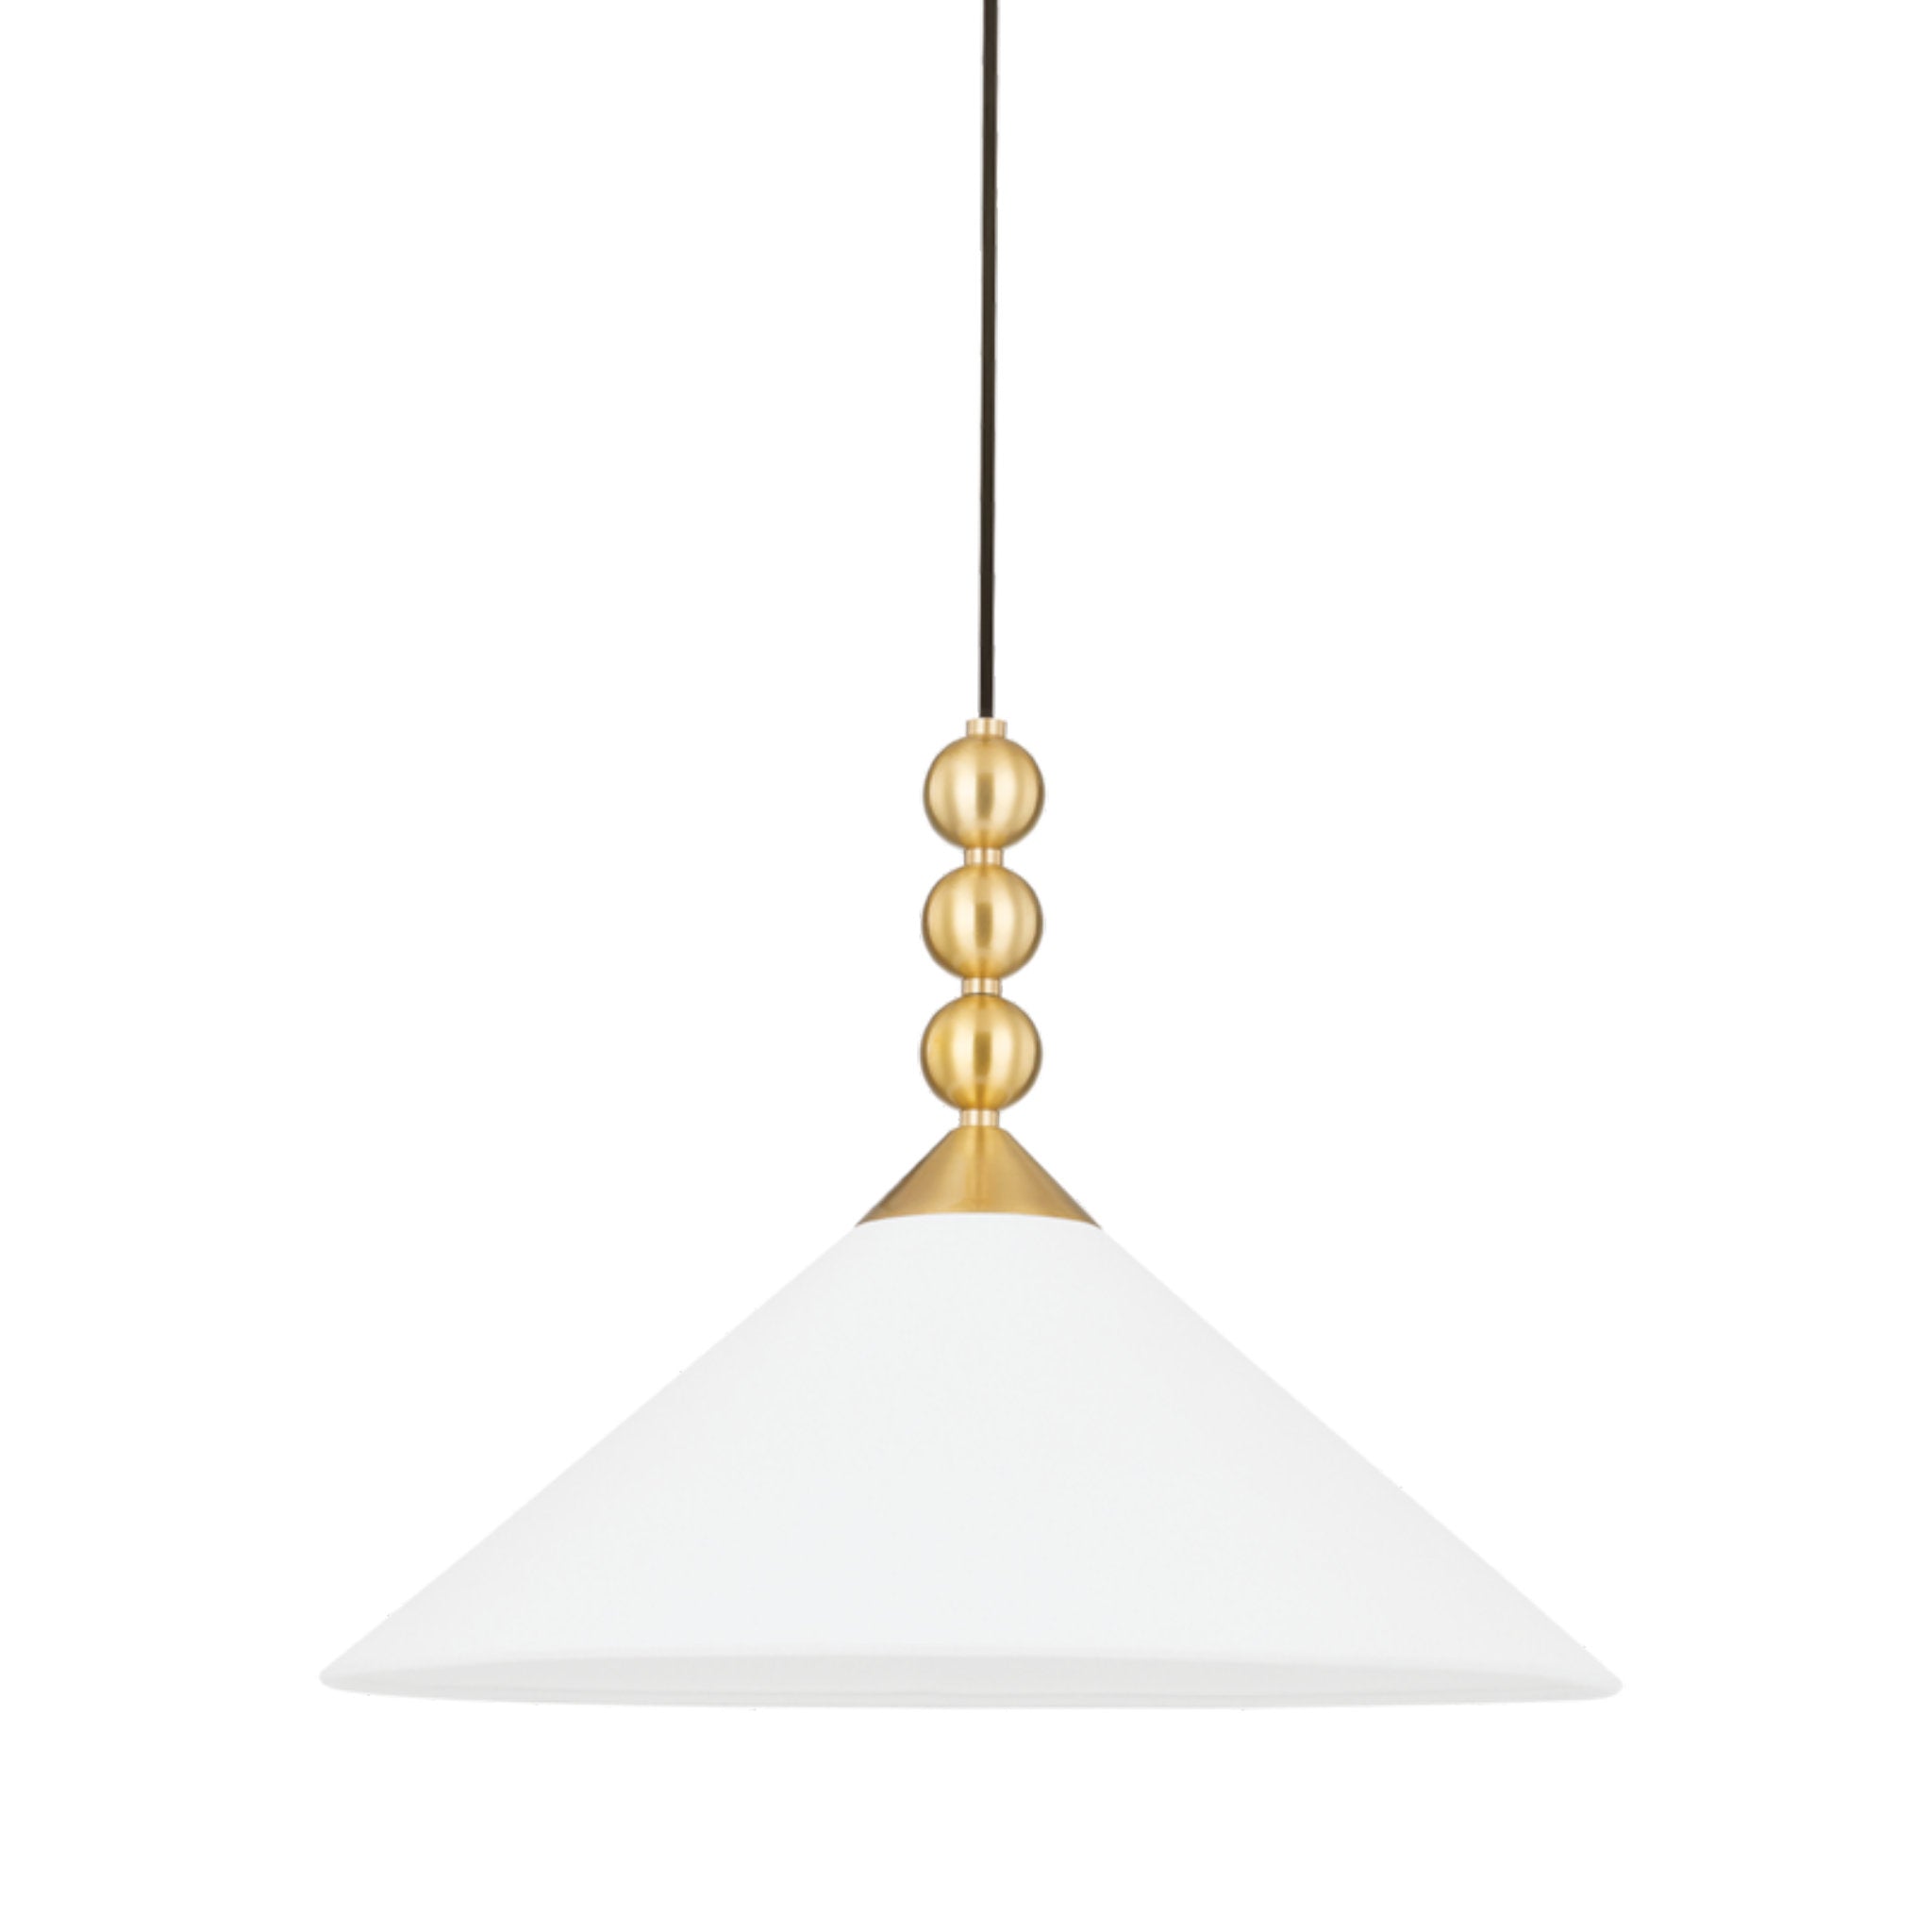 Sang 1 Light Pendant in Aged Brass by Dabito